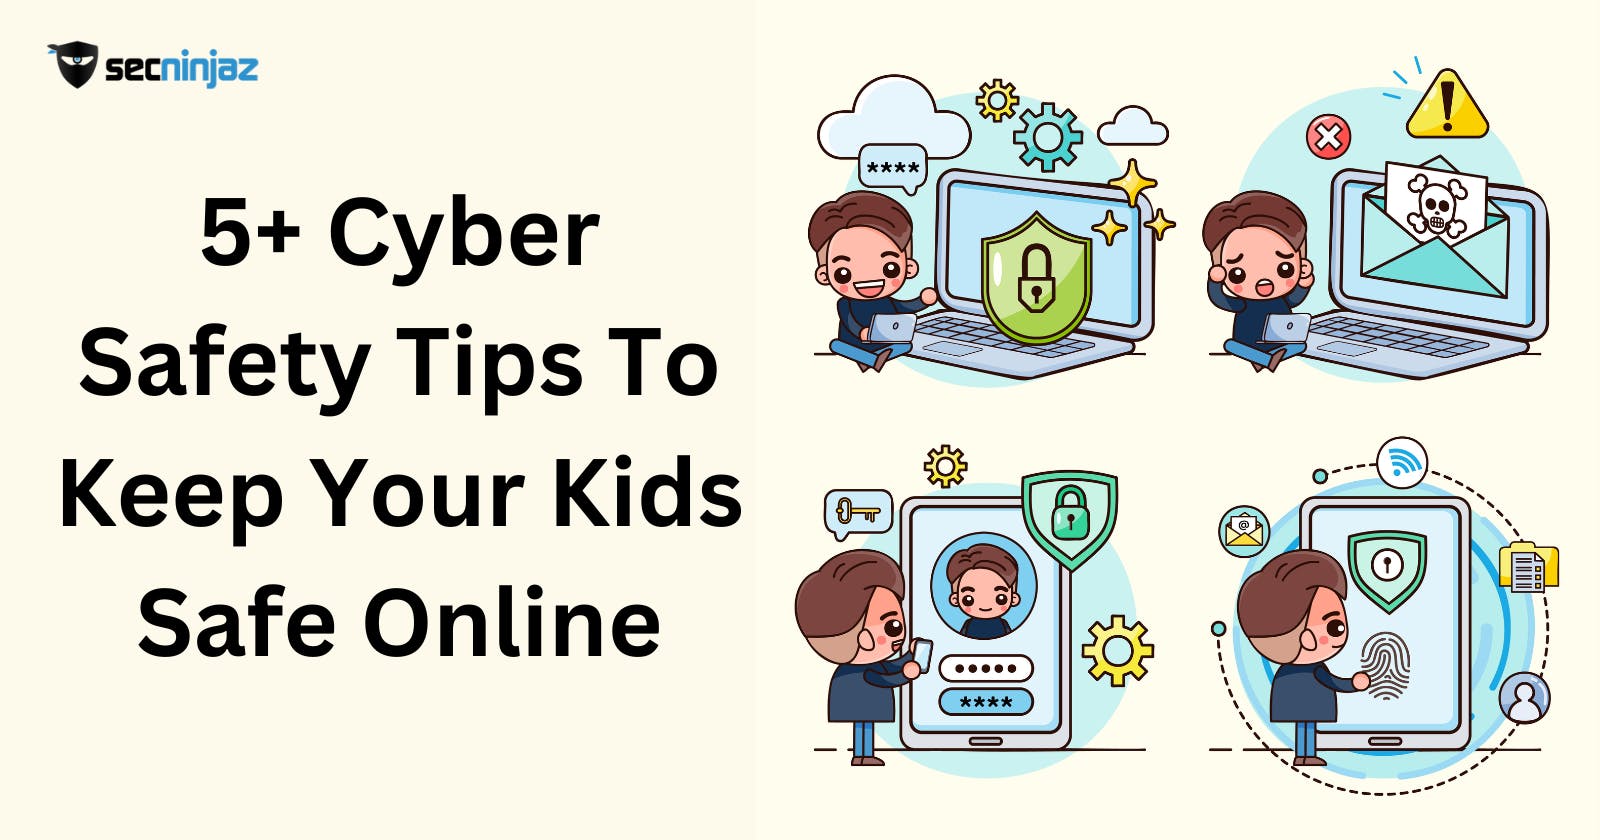 5+ Cyber Safety Tips To Keep Your Kids Safe Online